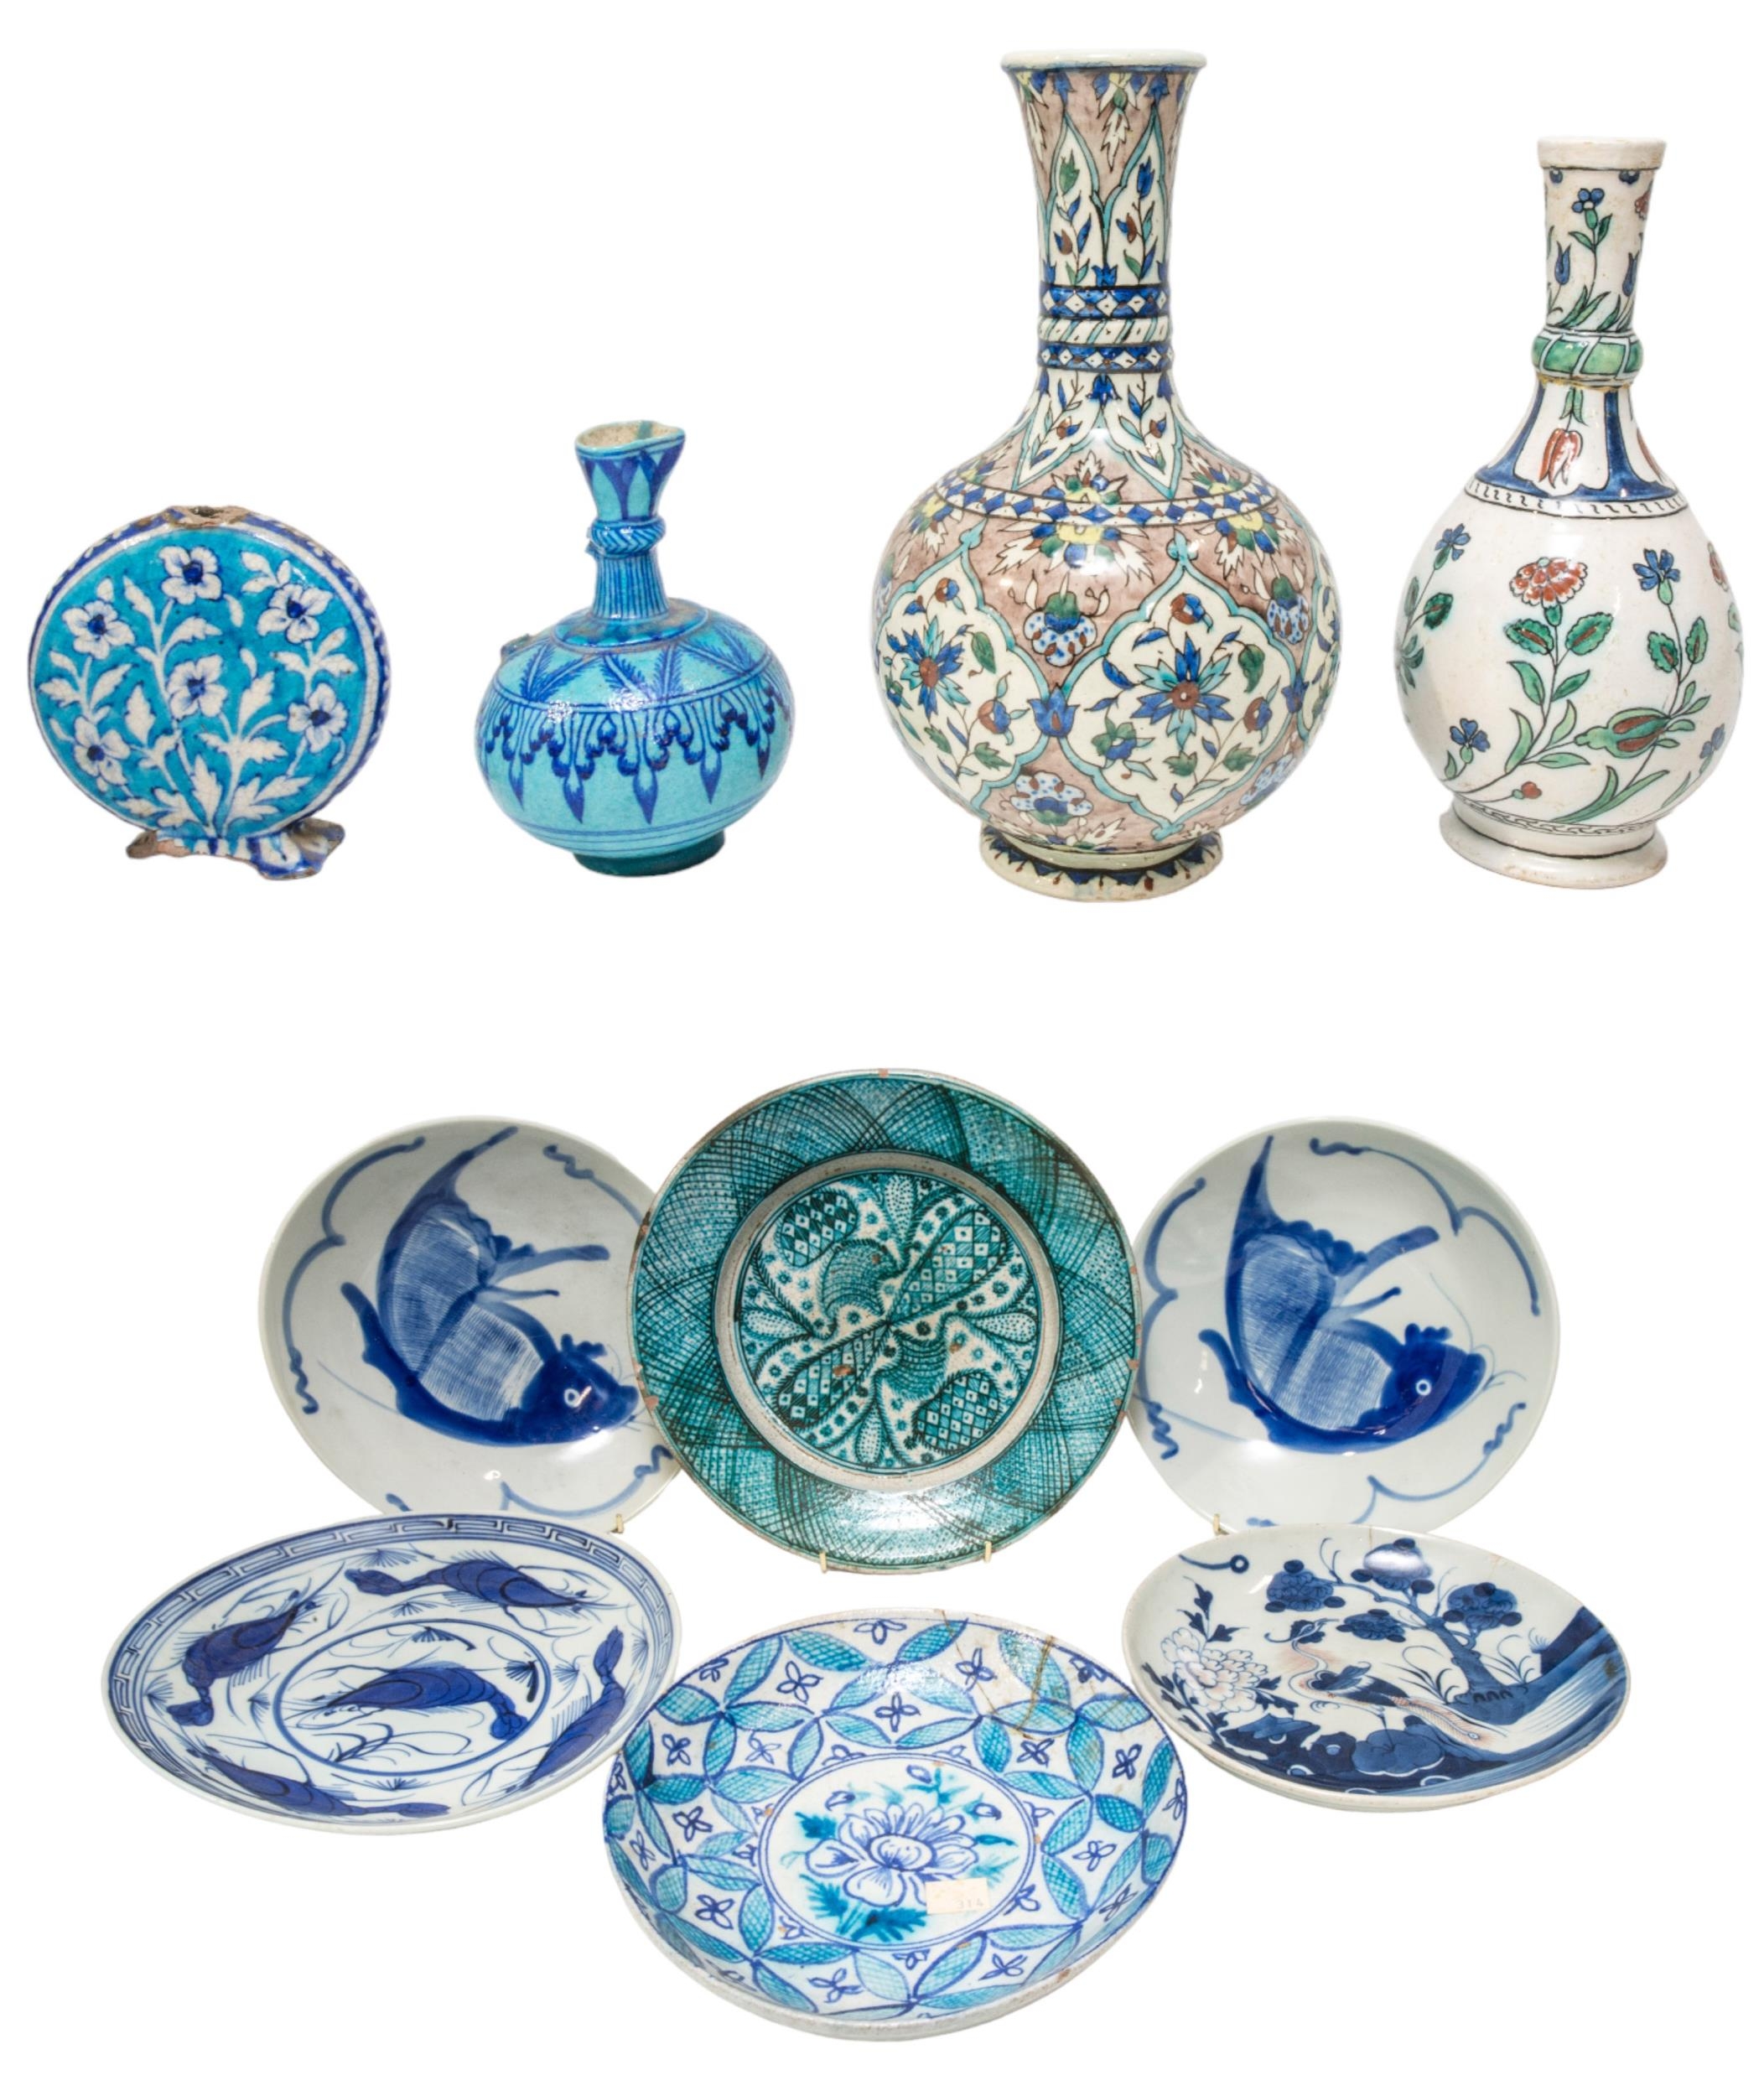 A GROUP OF IZNIK STYLE POTTERY WARE, NEAR EASTERN/PERSIAN, PREDOMINANTLY 19TH CENTURY, the lot